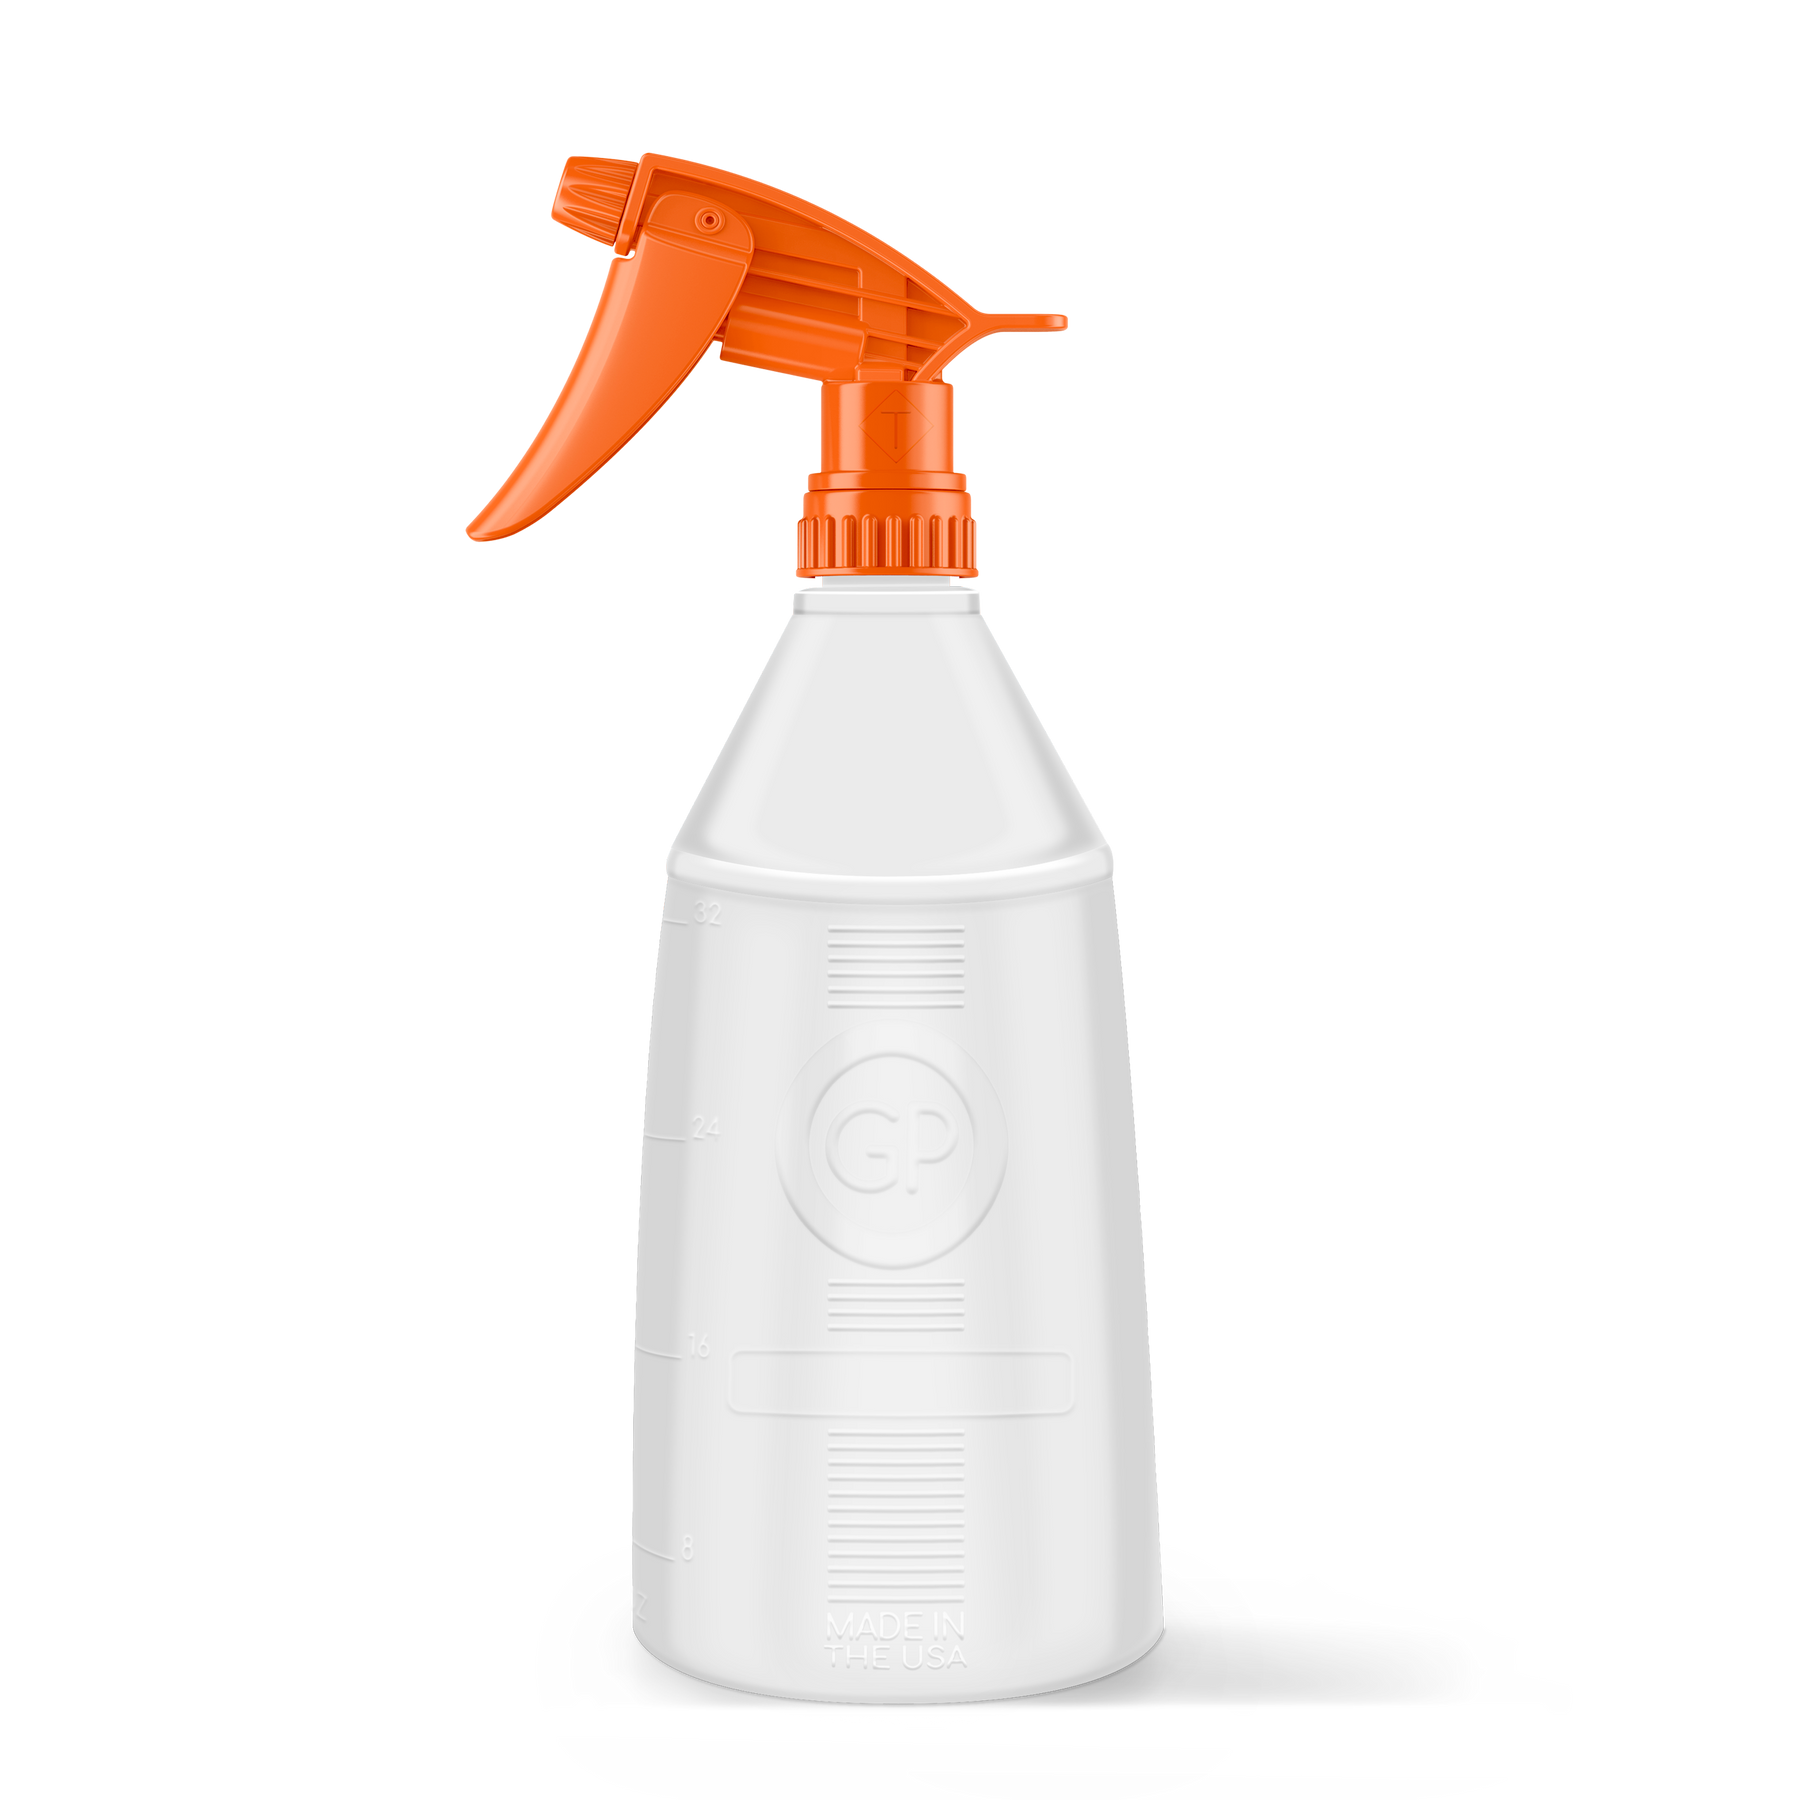 1 Gallon Sprayer for Large Application Disinfecting (Empty